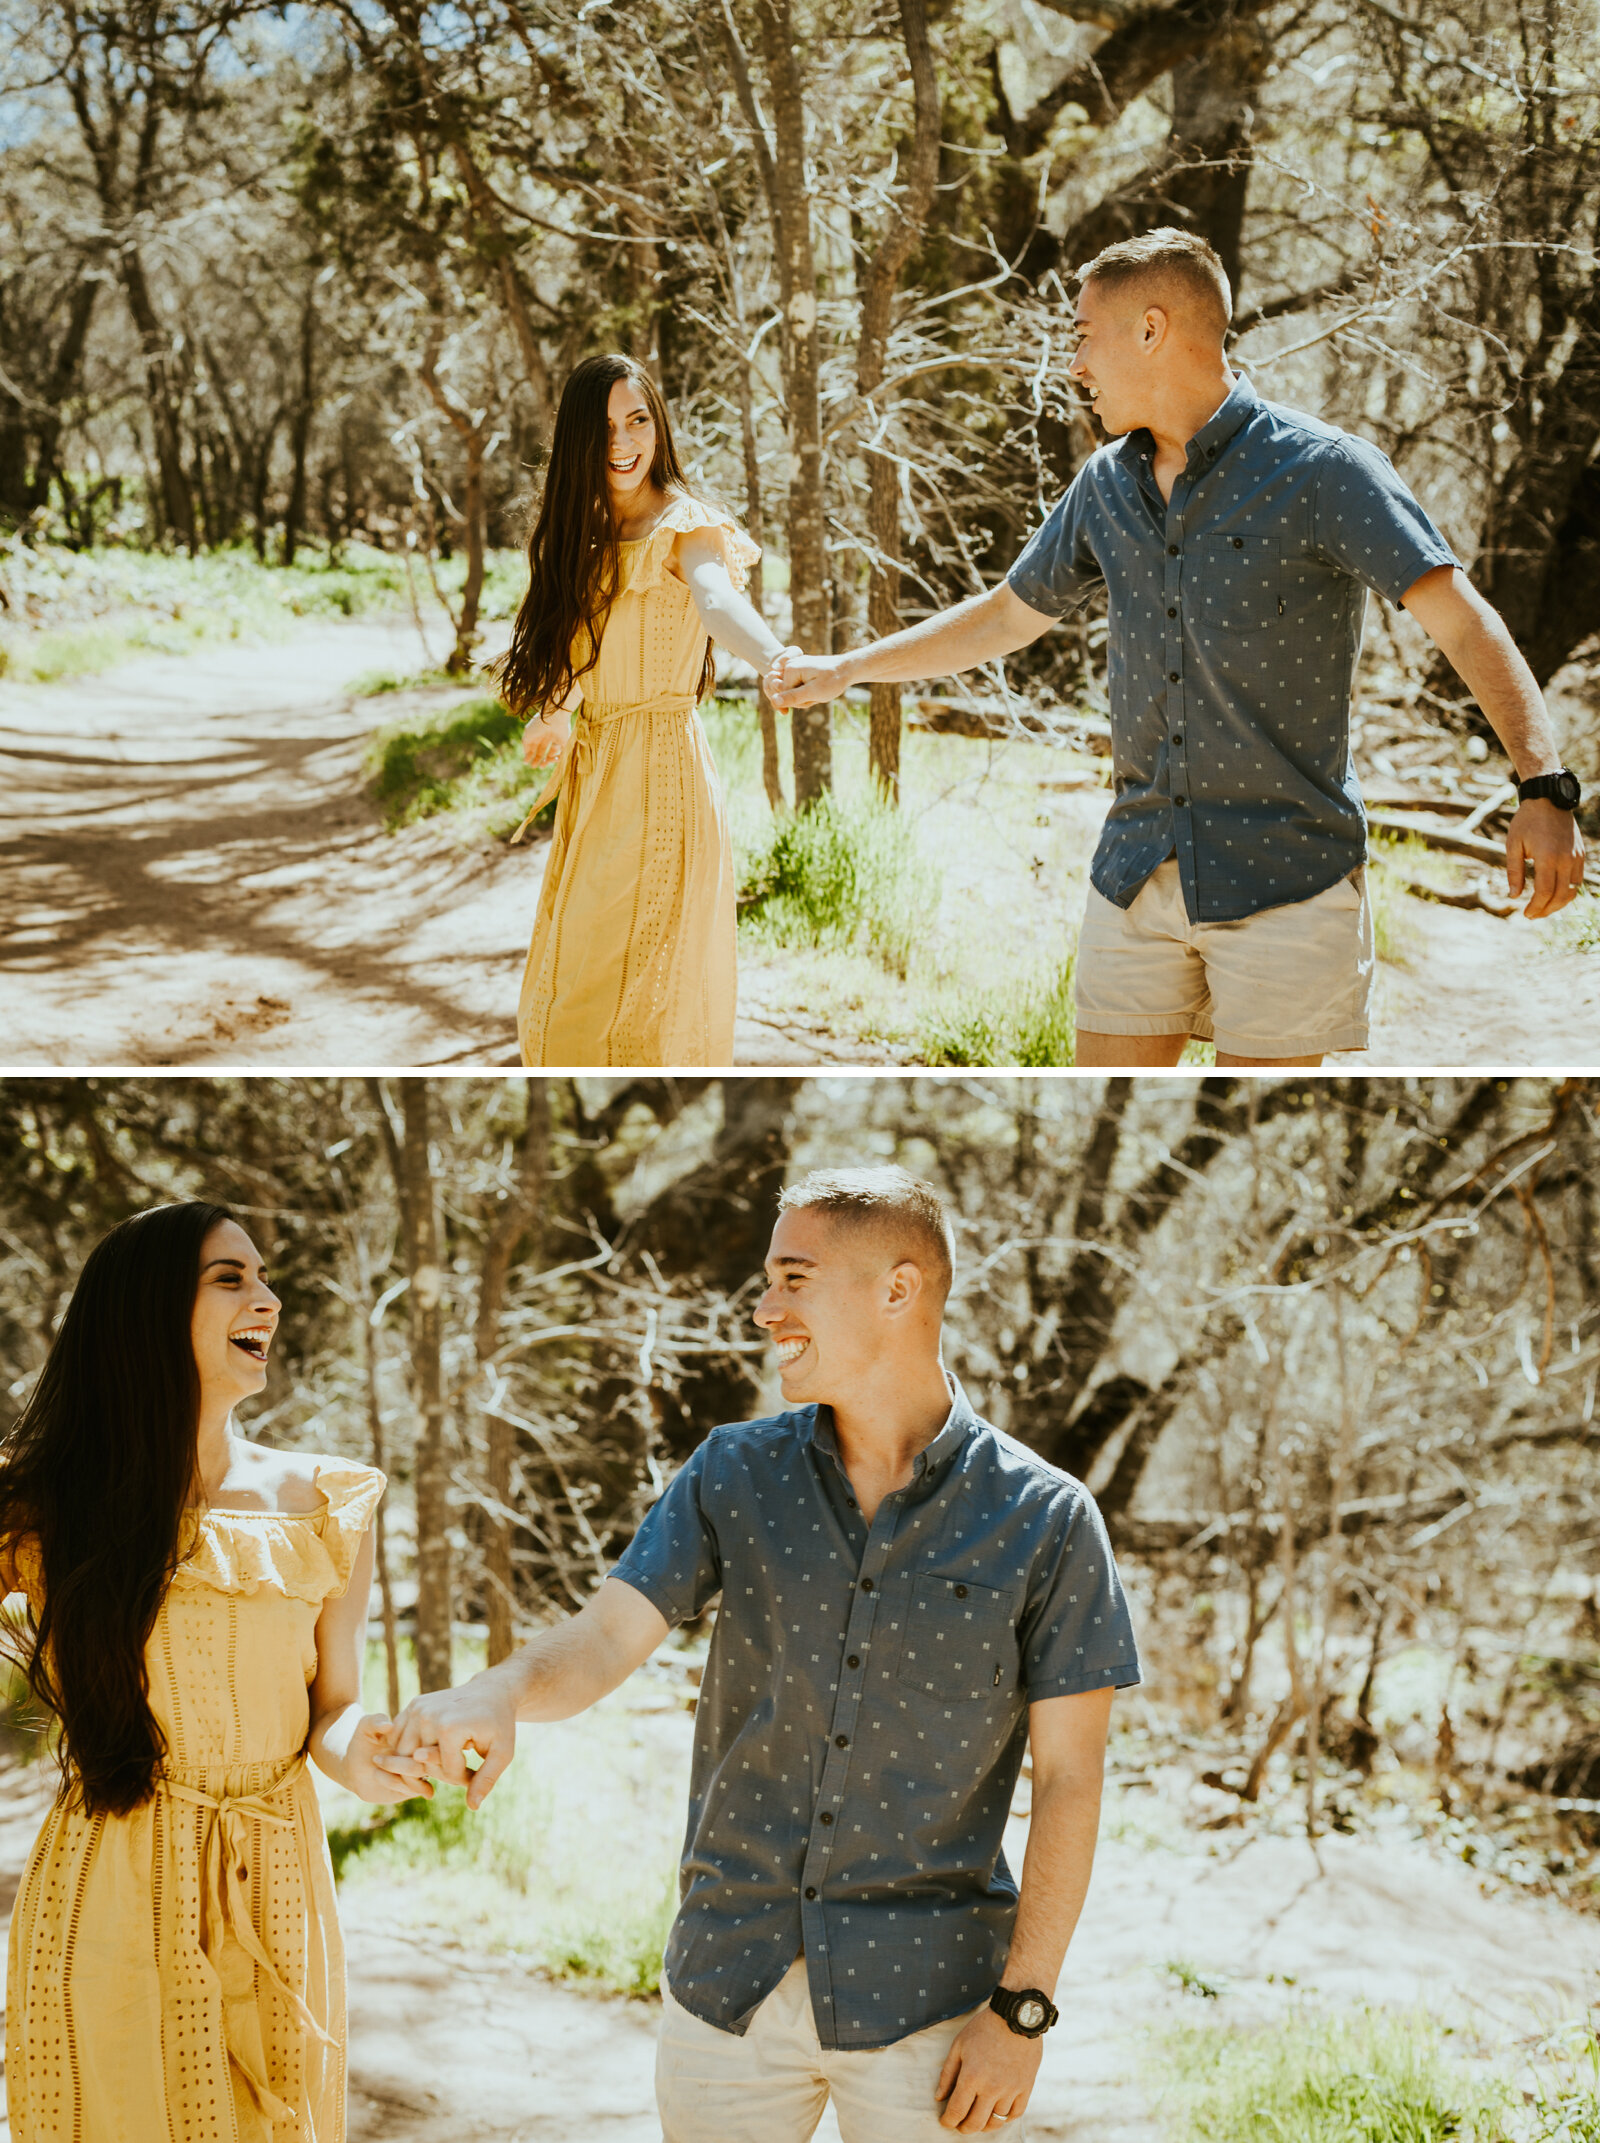 red rock crossing sedona arizona cathedral rock crescent moon ranch couple photos engagement photo outfit inspiration couple posing ideas midday photos anniversary photos.jpg